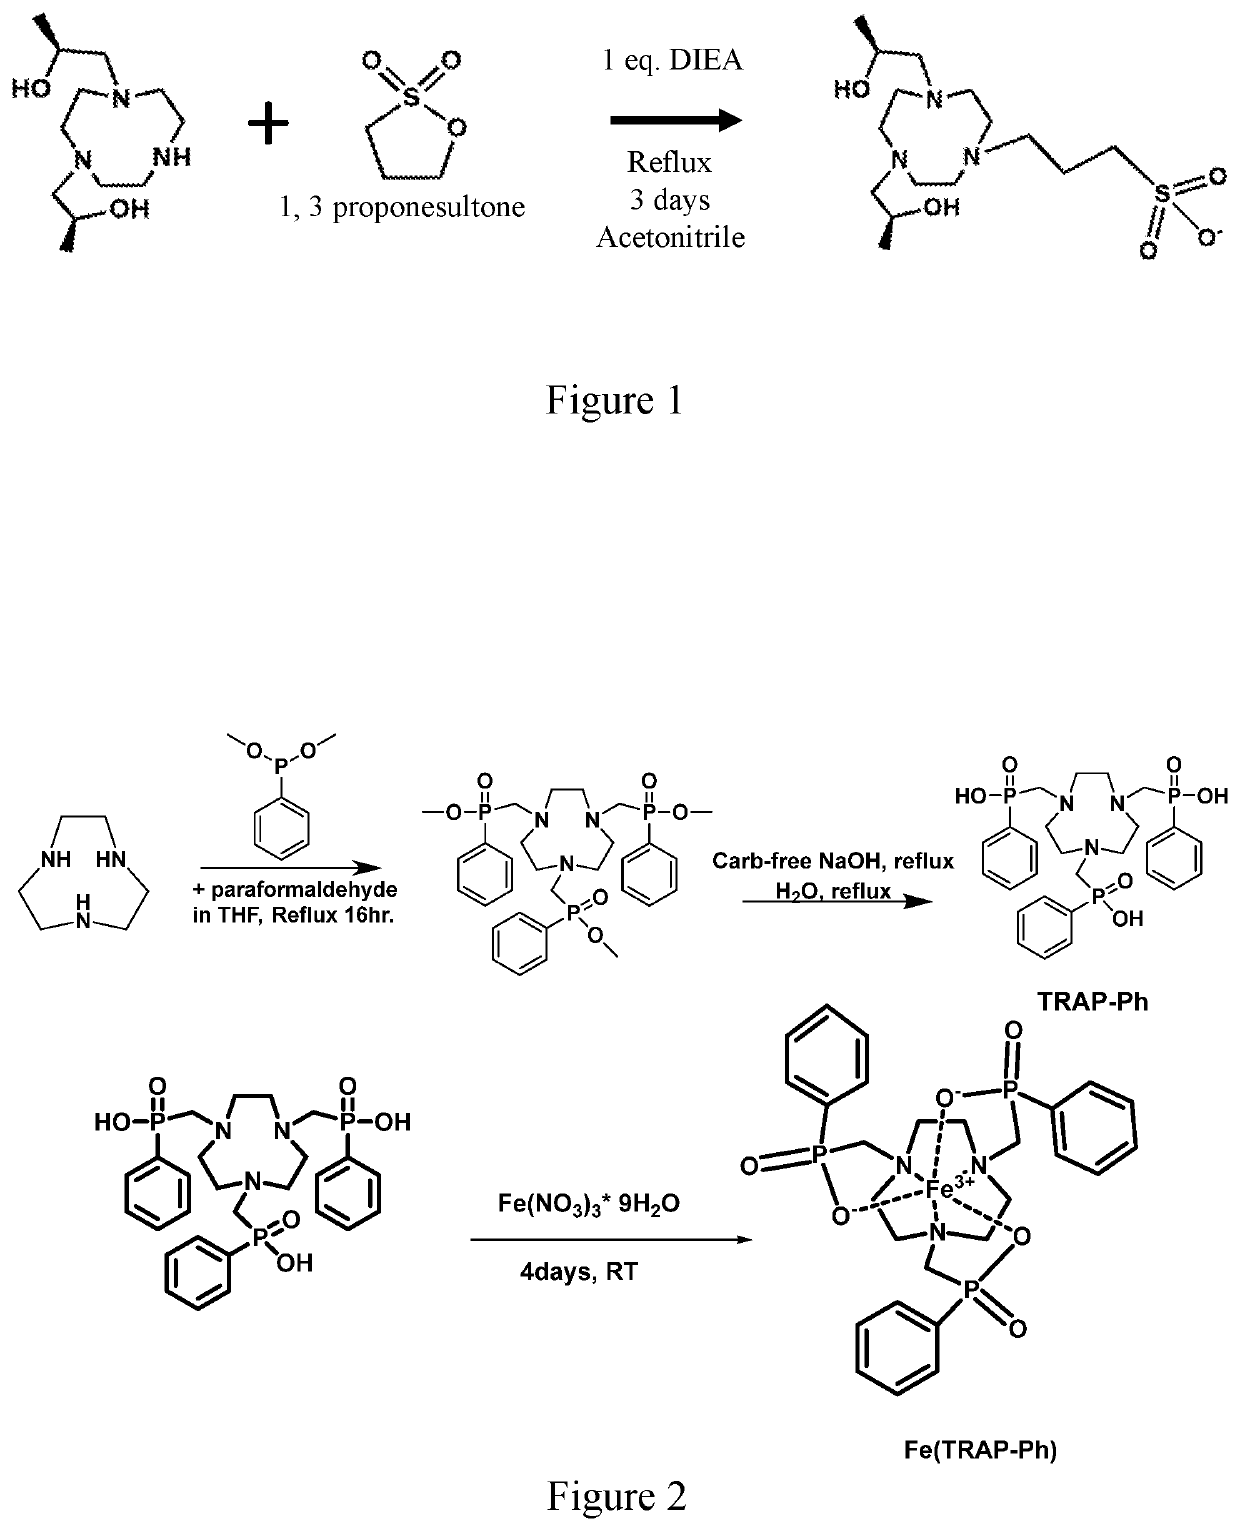 Compounds for use as iron (III) MRI contrast agents containing anionic pendents and ancillary groups